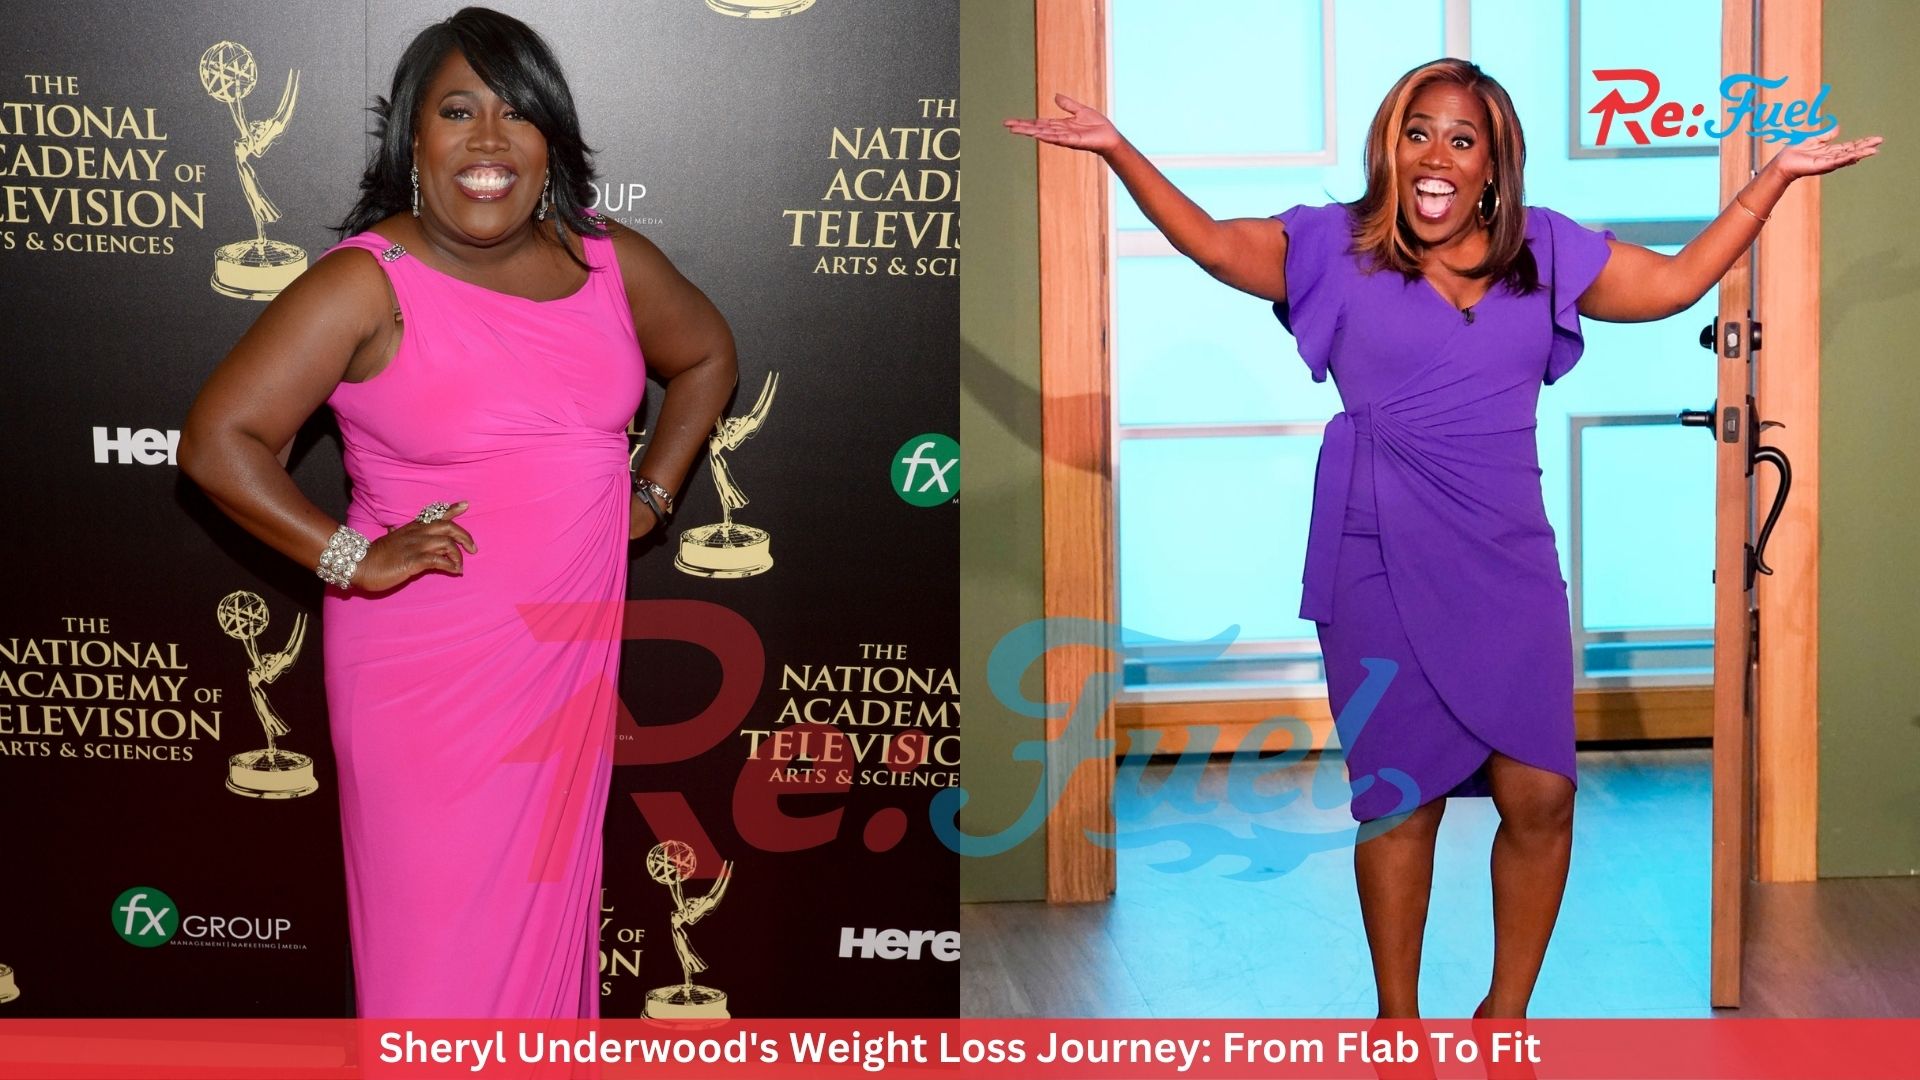 Sheryl Underwood's Weight Loss Journey: From Flab To Fit